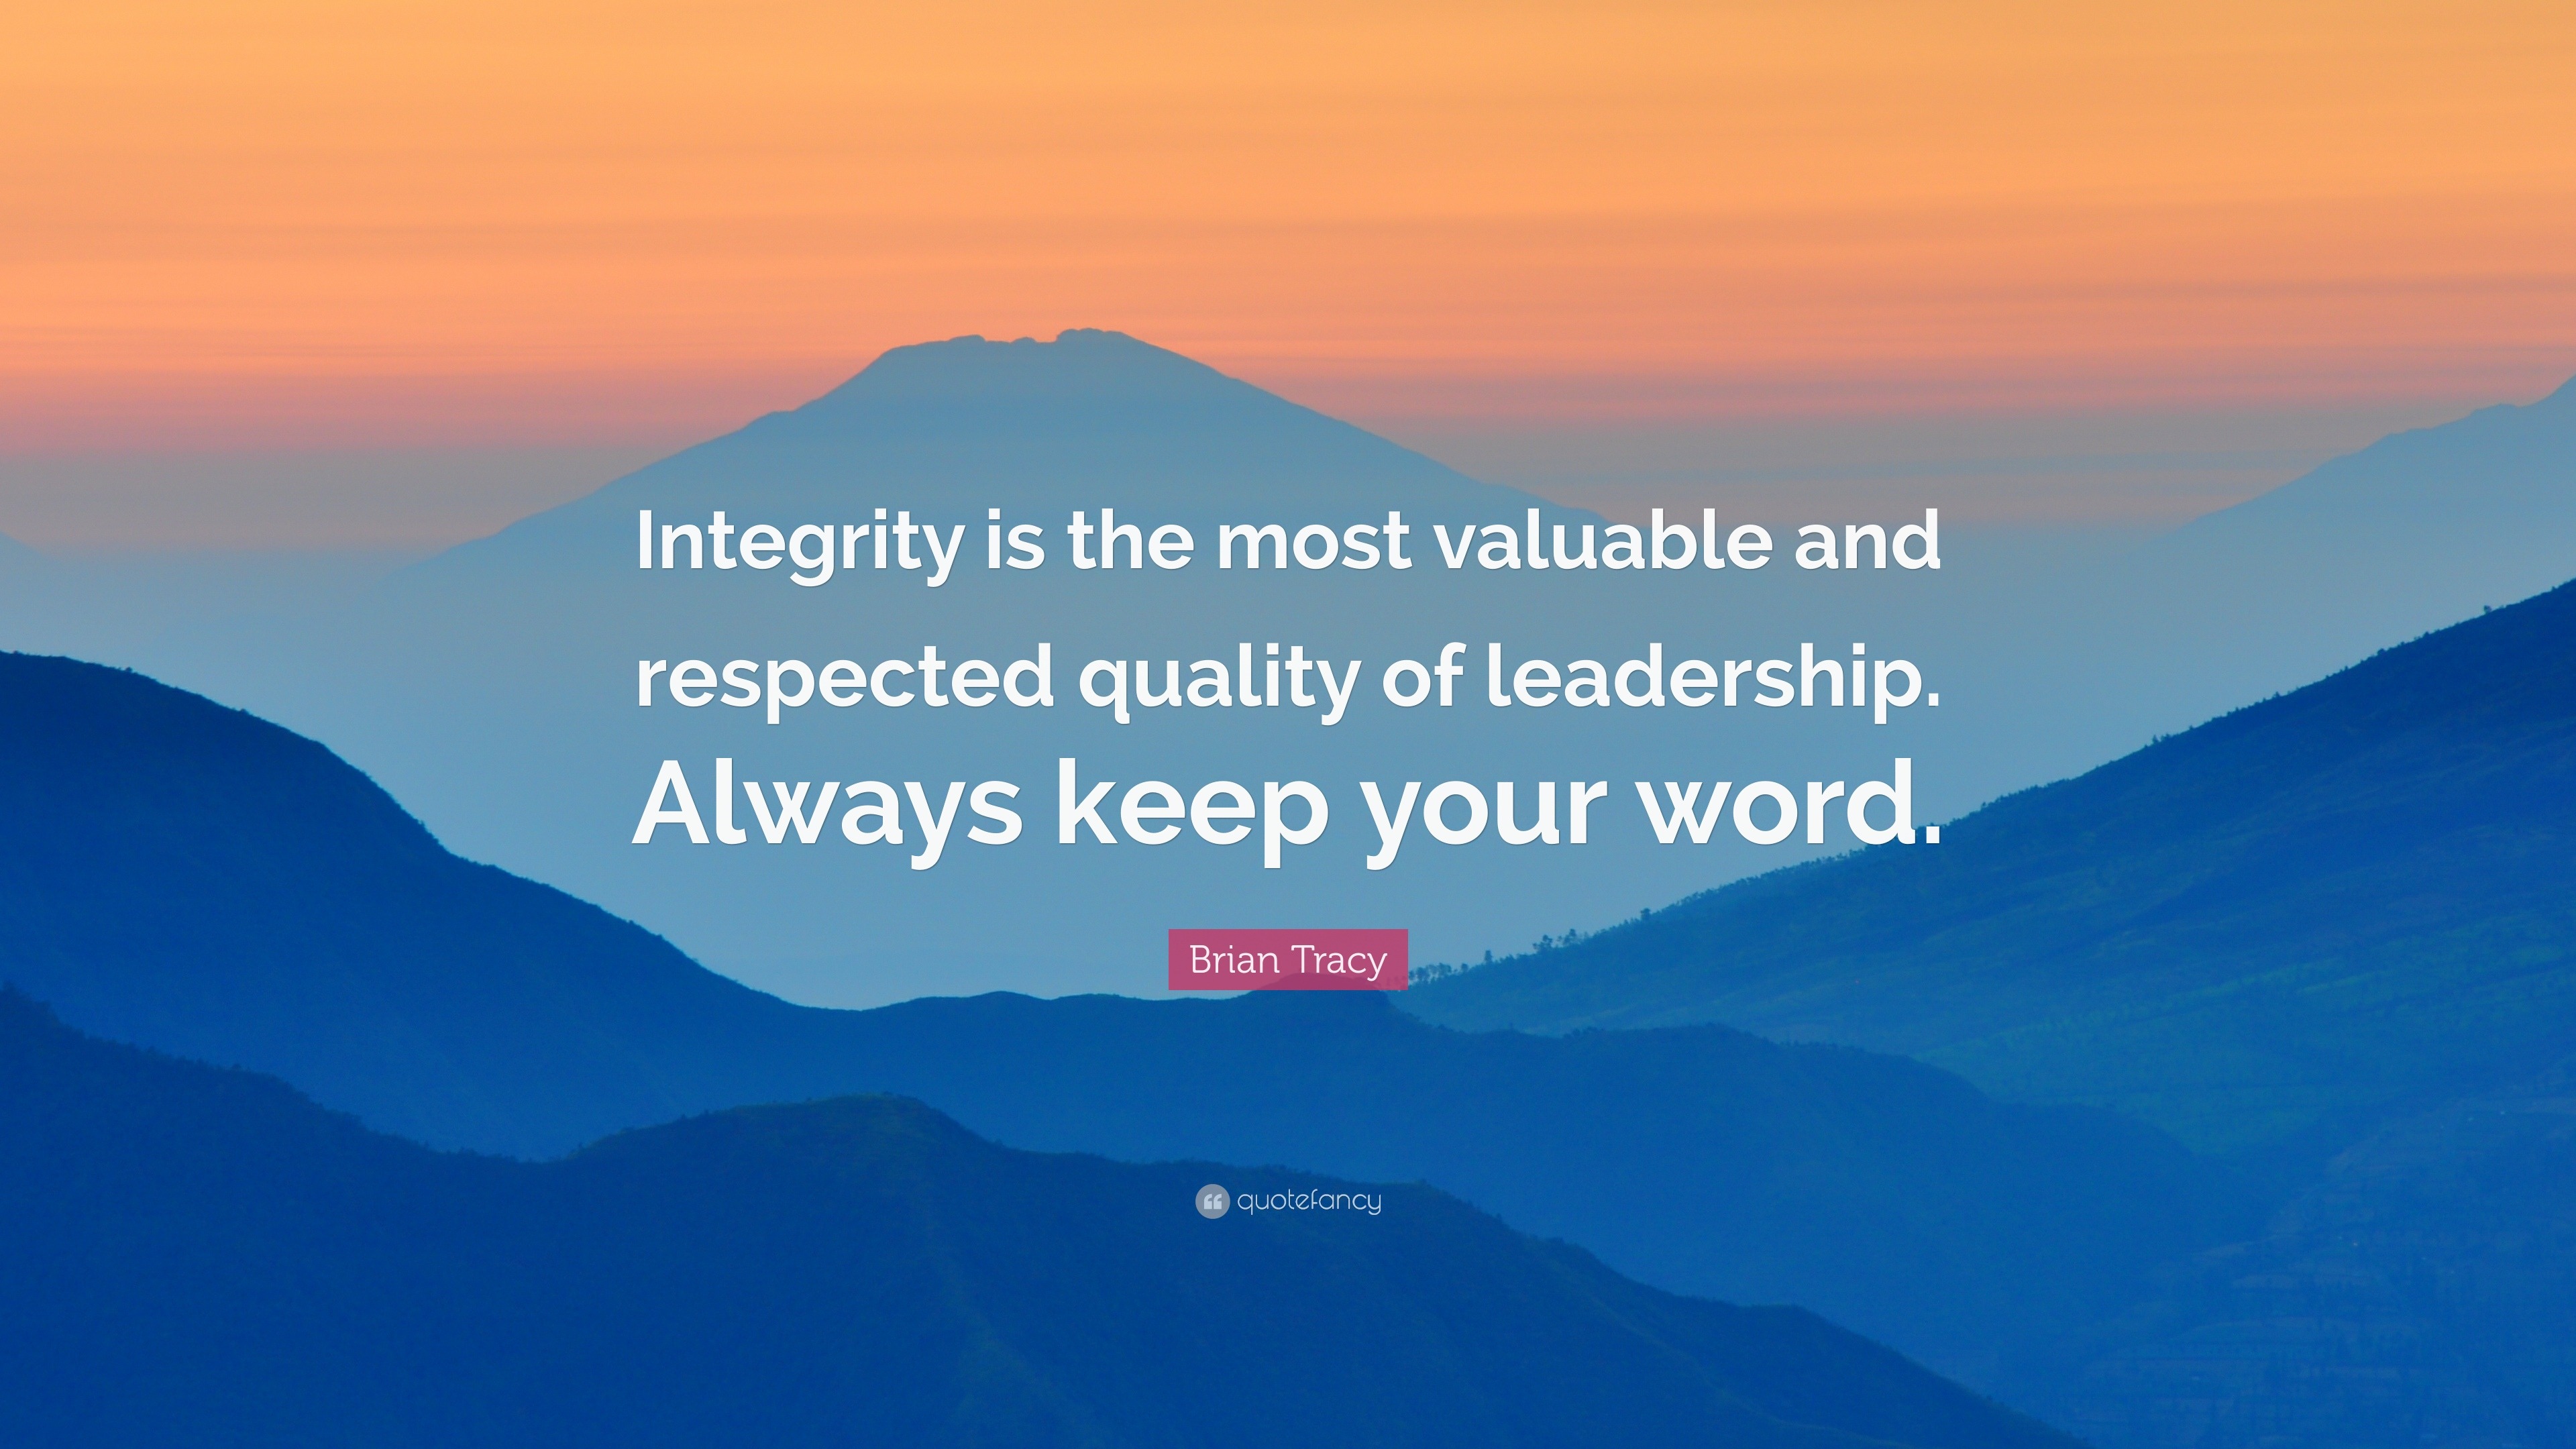 Brian Tracy Quote: “Integrity is the most valuable and respected